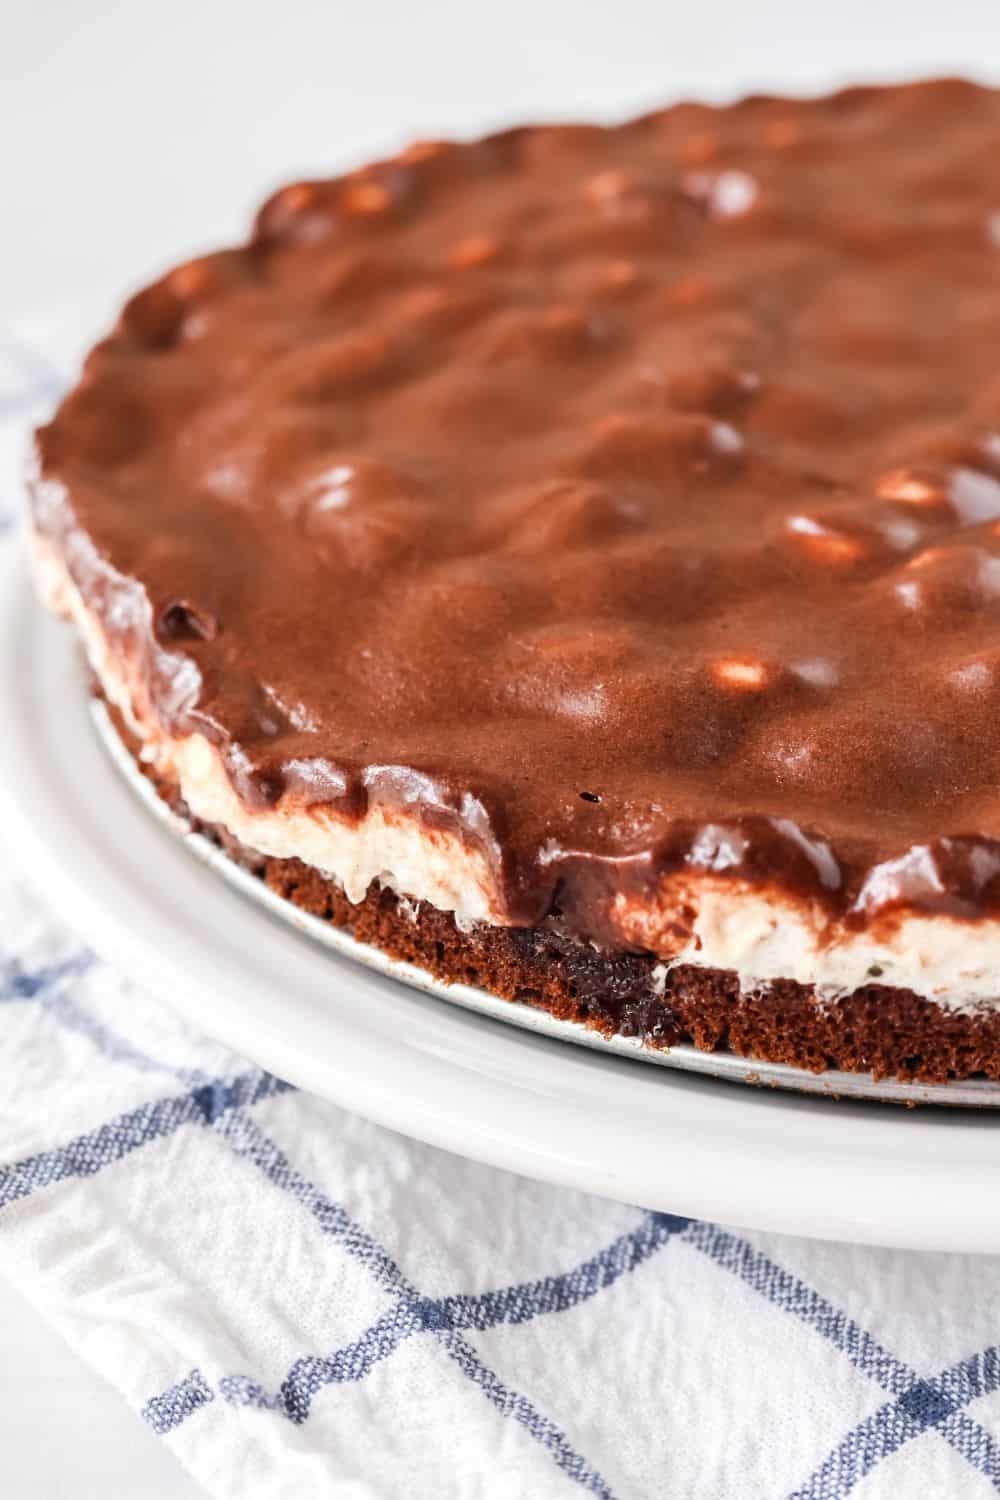 view of the side of a fudge brownie pie, including the brownie, marshmallow, and frosting layers.